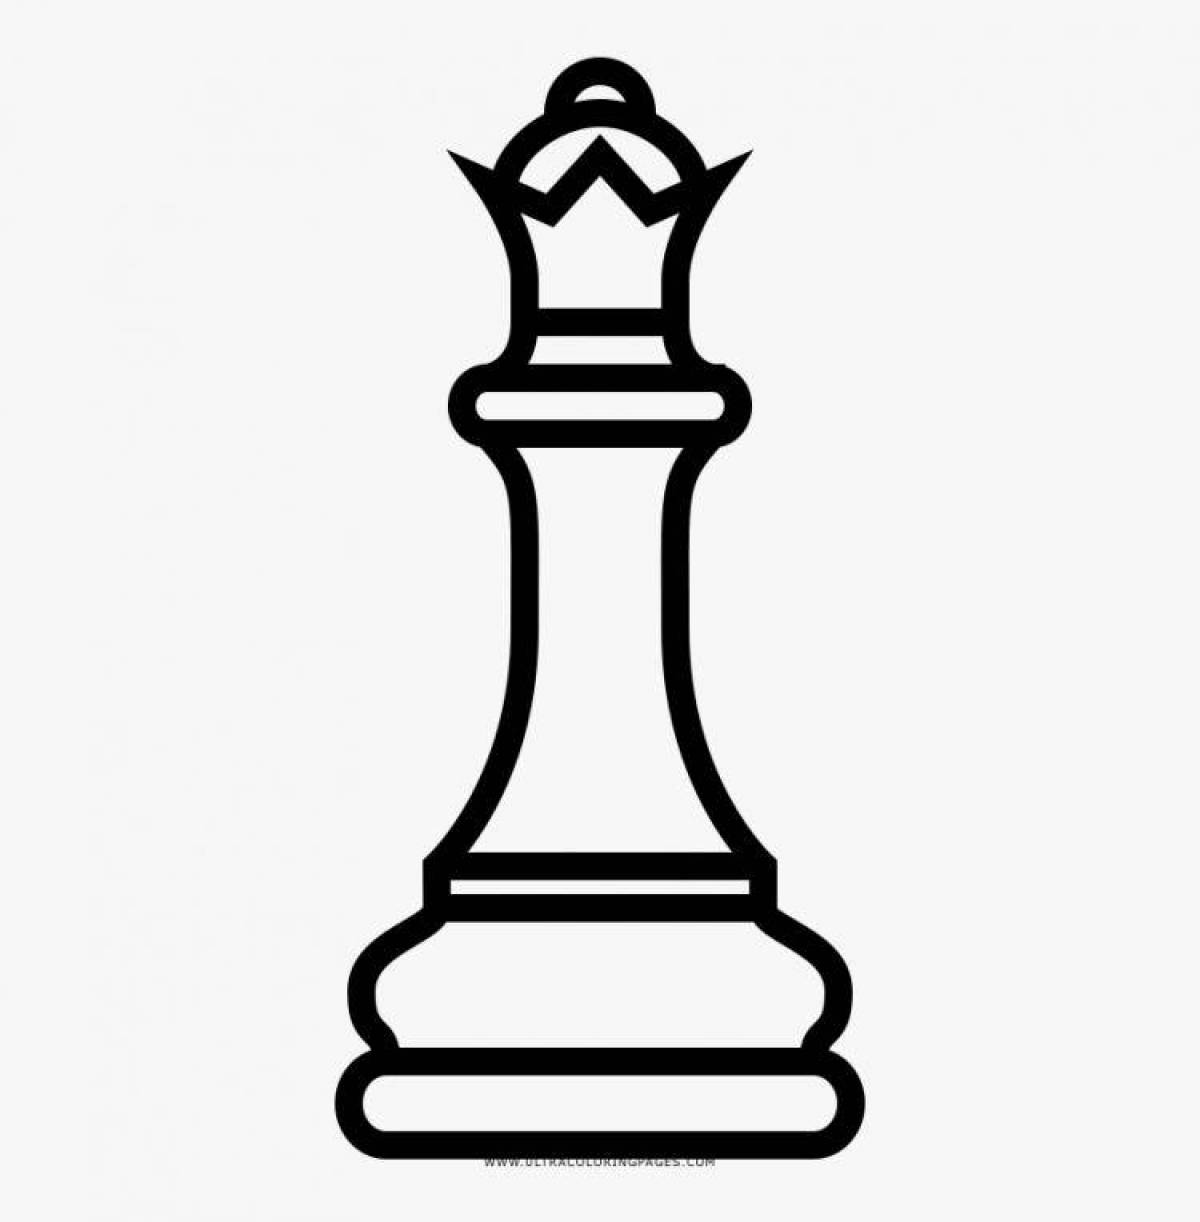 Coloring book for fascinating chess pieces